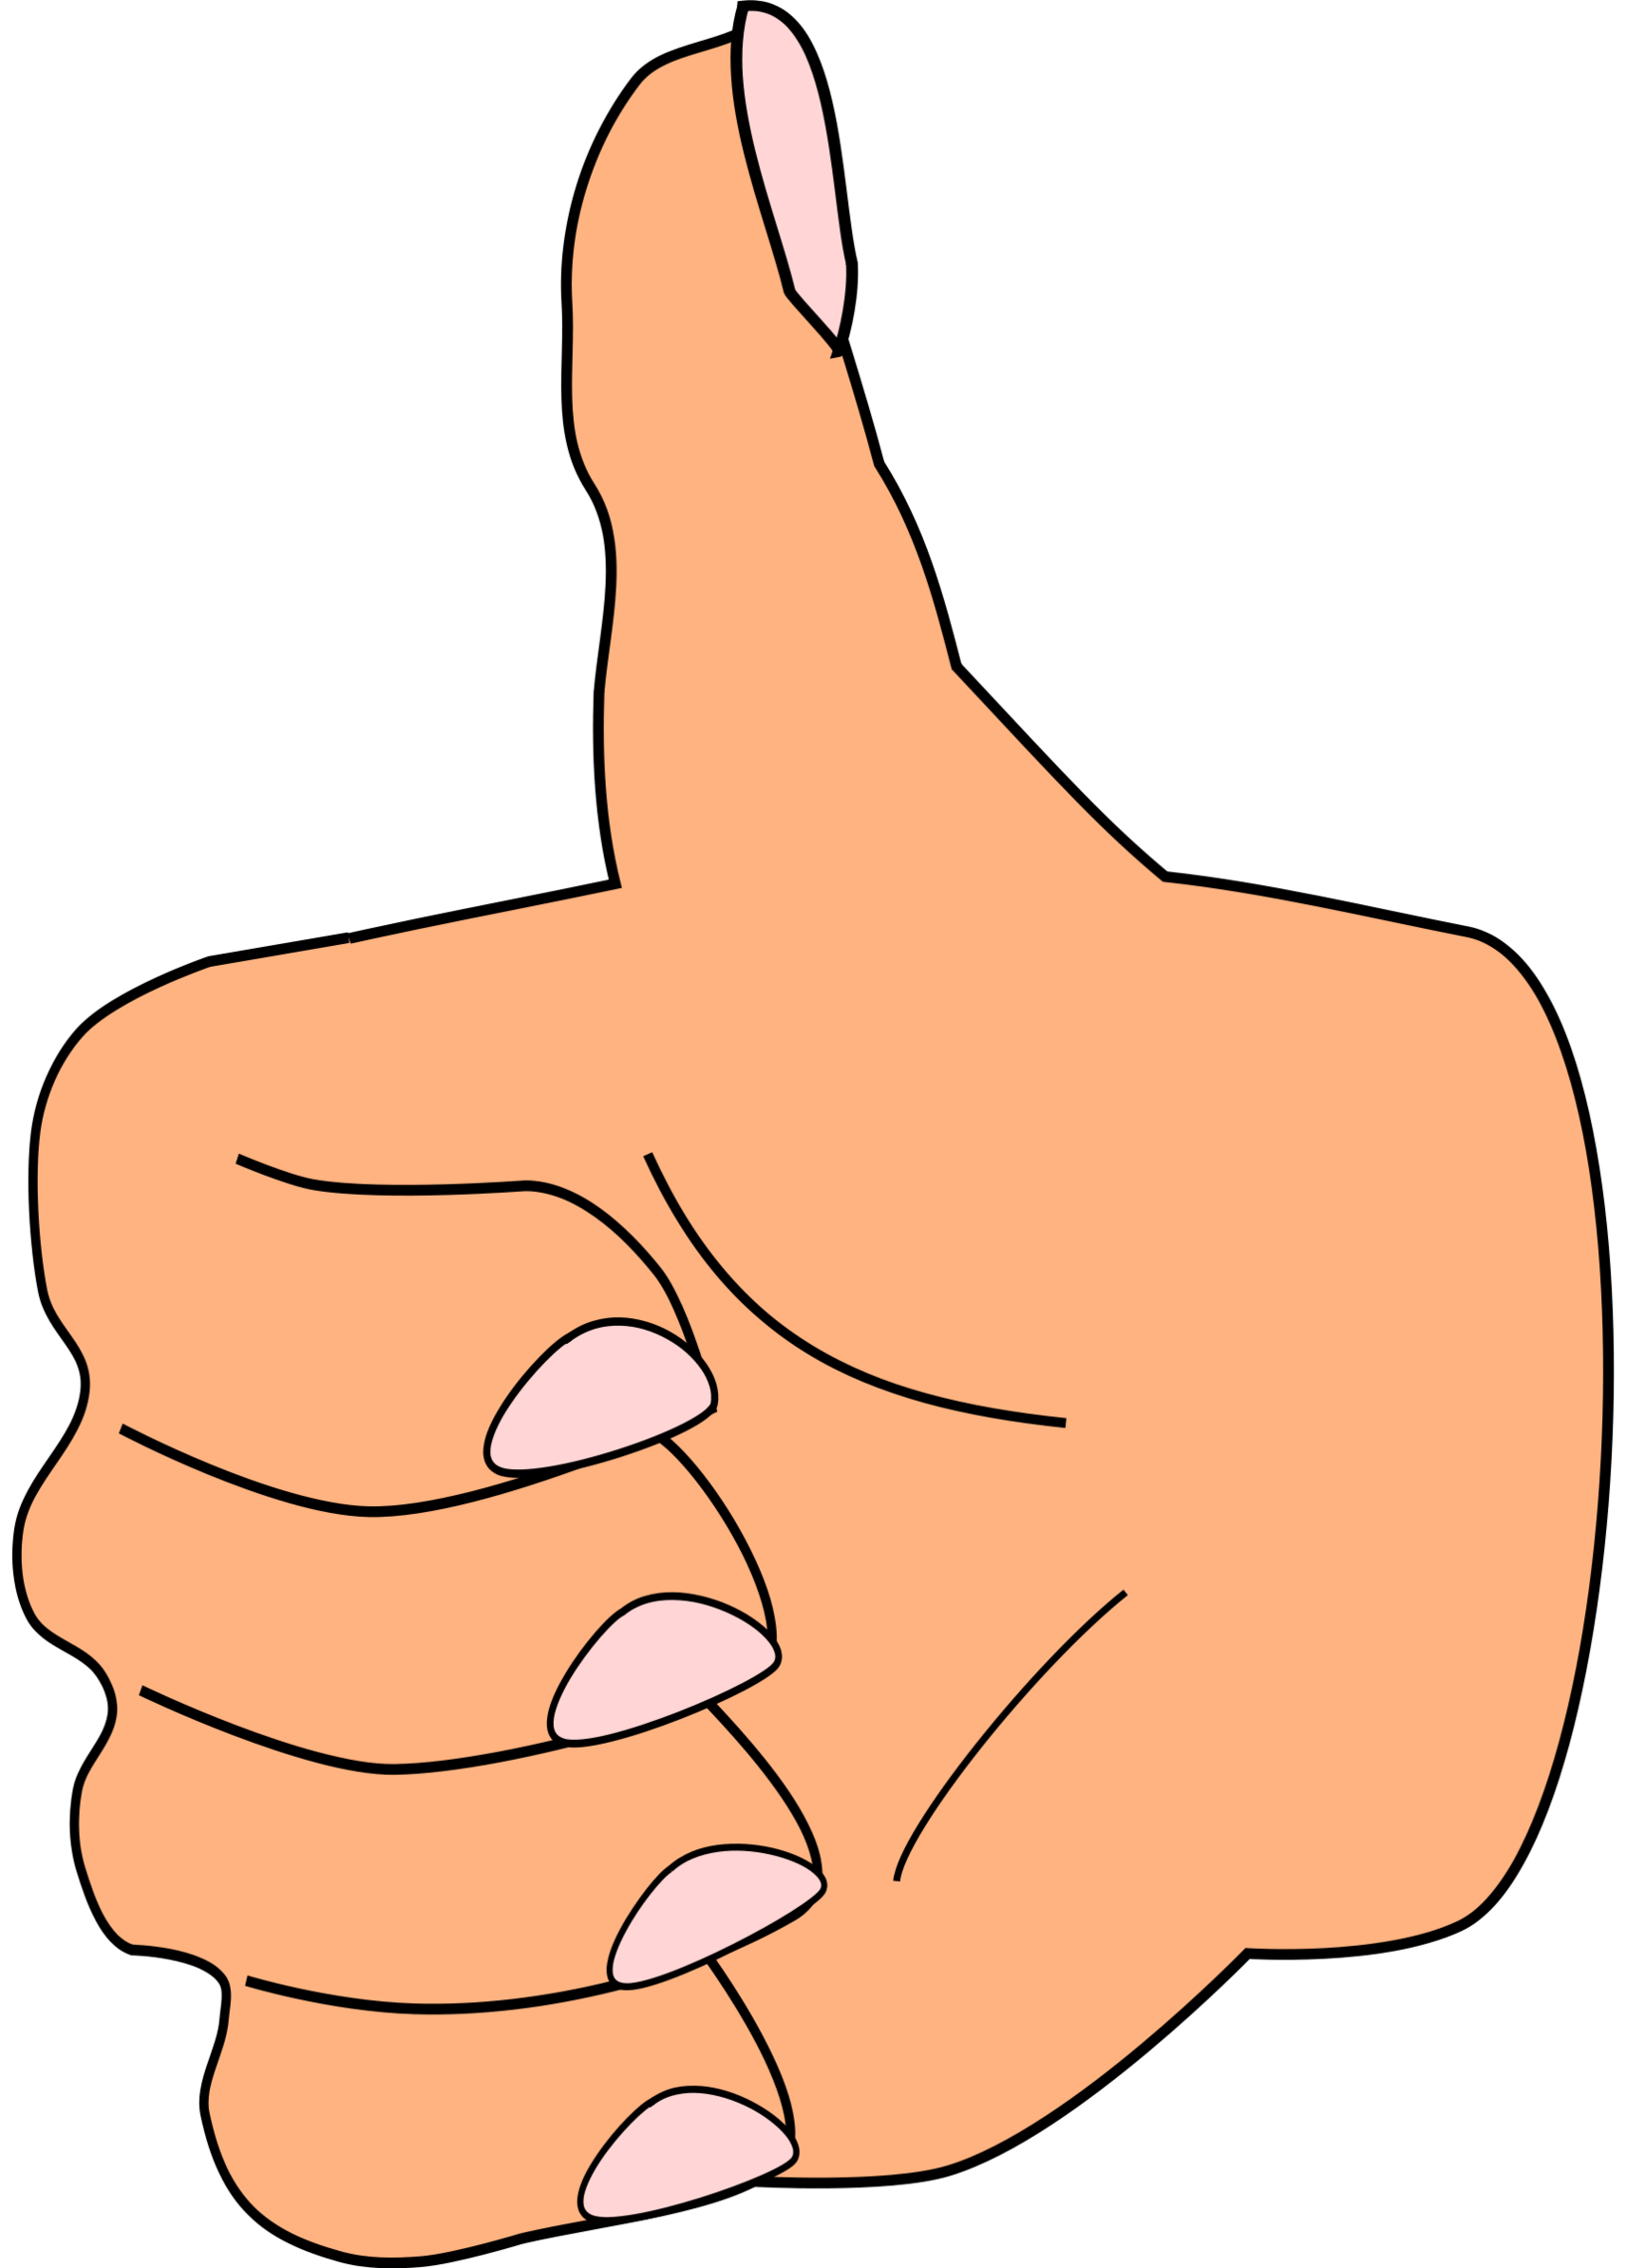 Clipart thumbs up thumbs down clipart - Cliparting.com